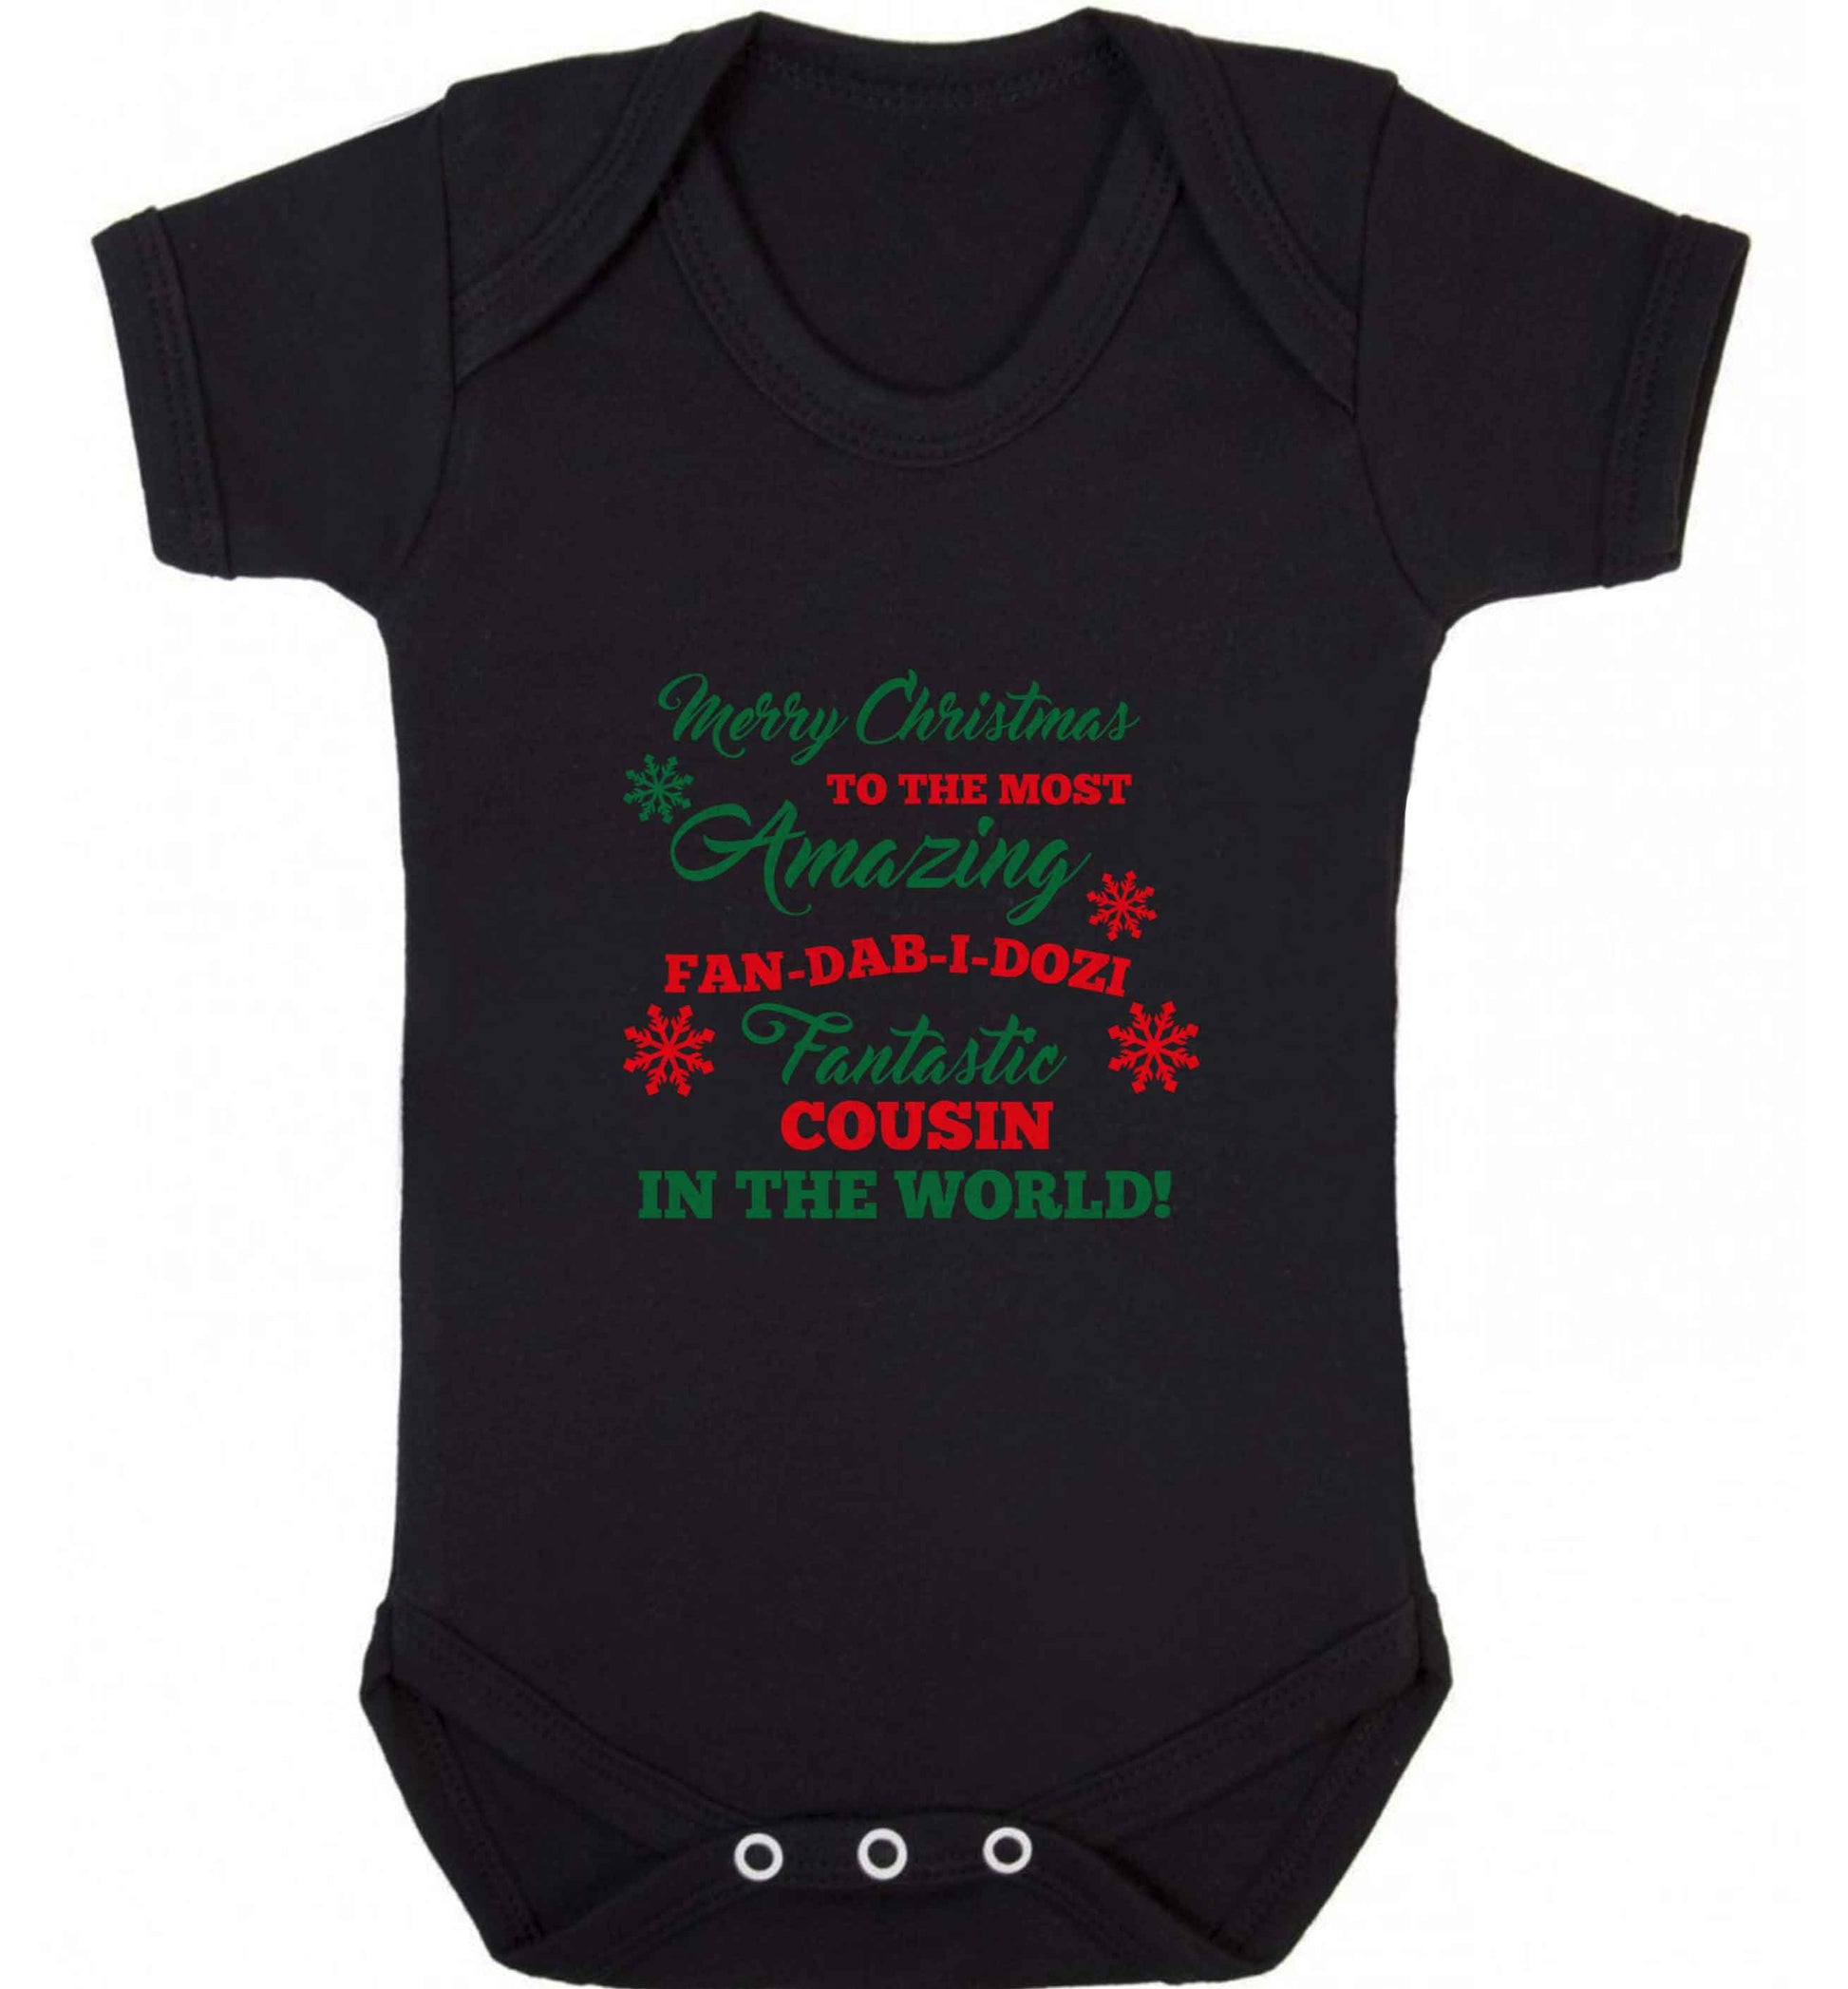 Merry Christmas to the most amazing fan-dab-i-dozi fantasic Cousin in the world baby vest black 18-24 months